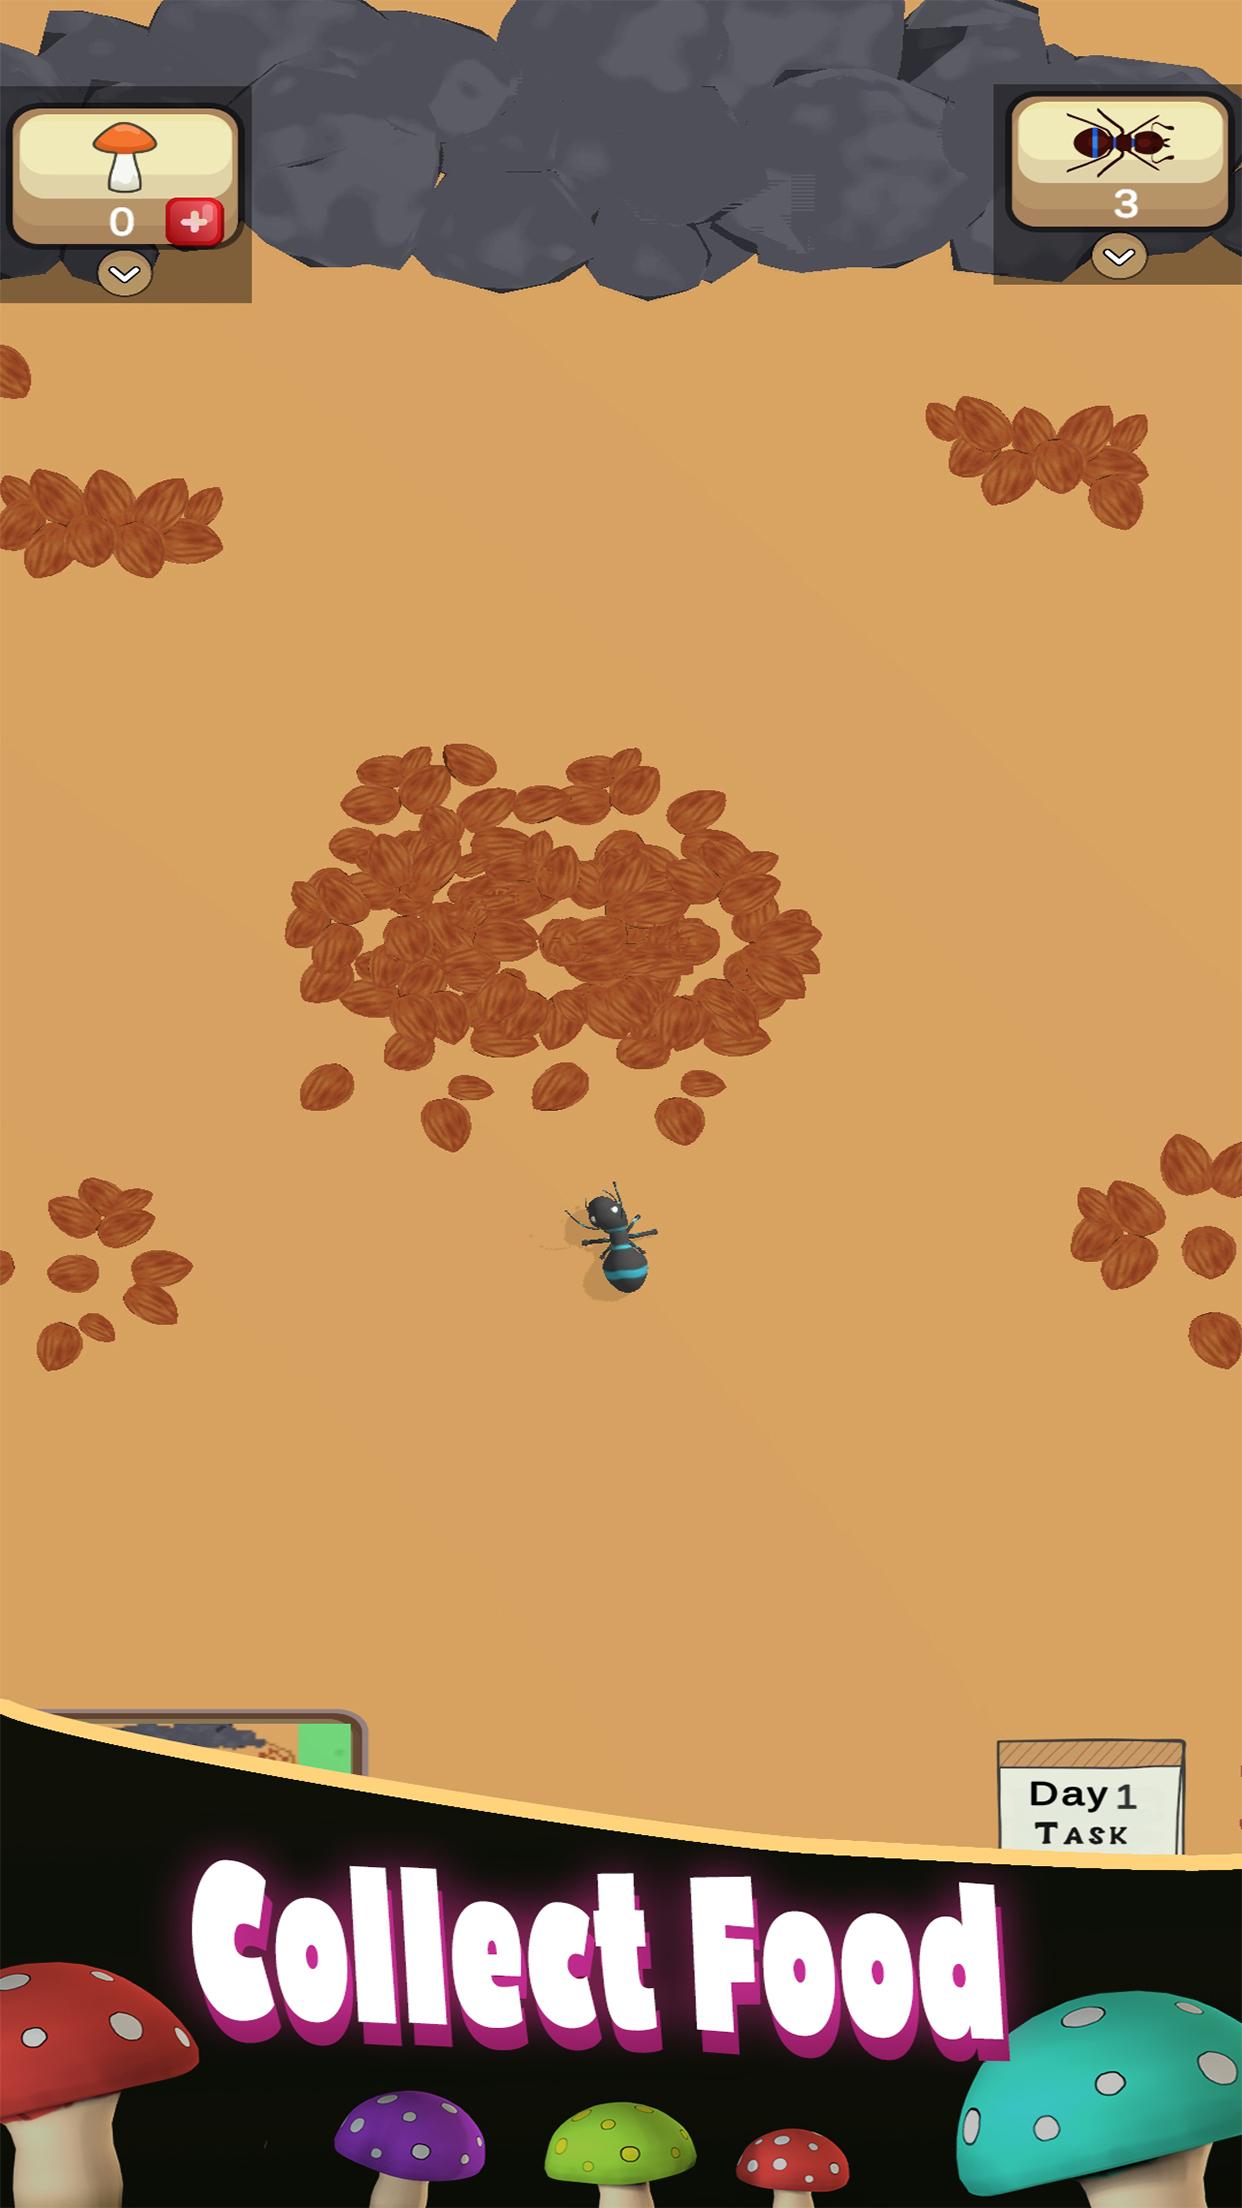 Ant Colony 3D: The Anthill Simulator Idle Games 2.7 Screenshot 9